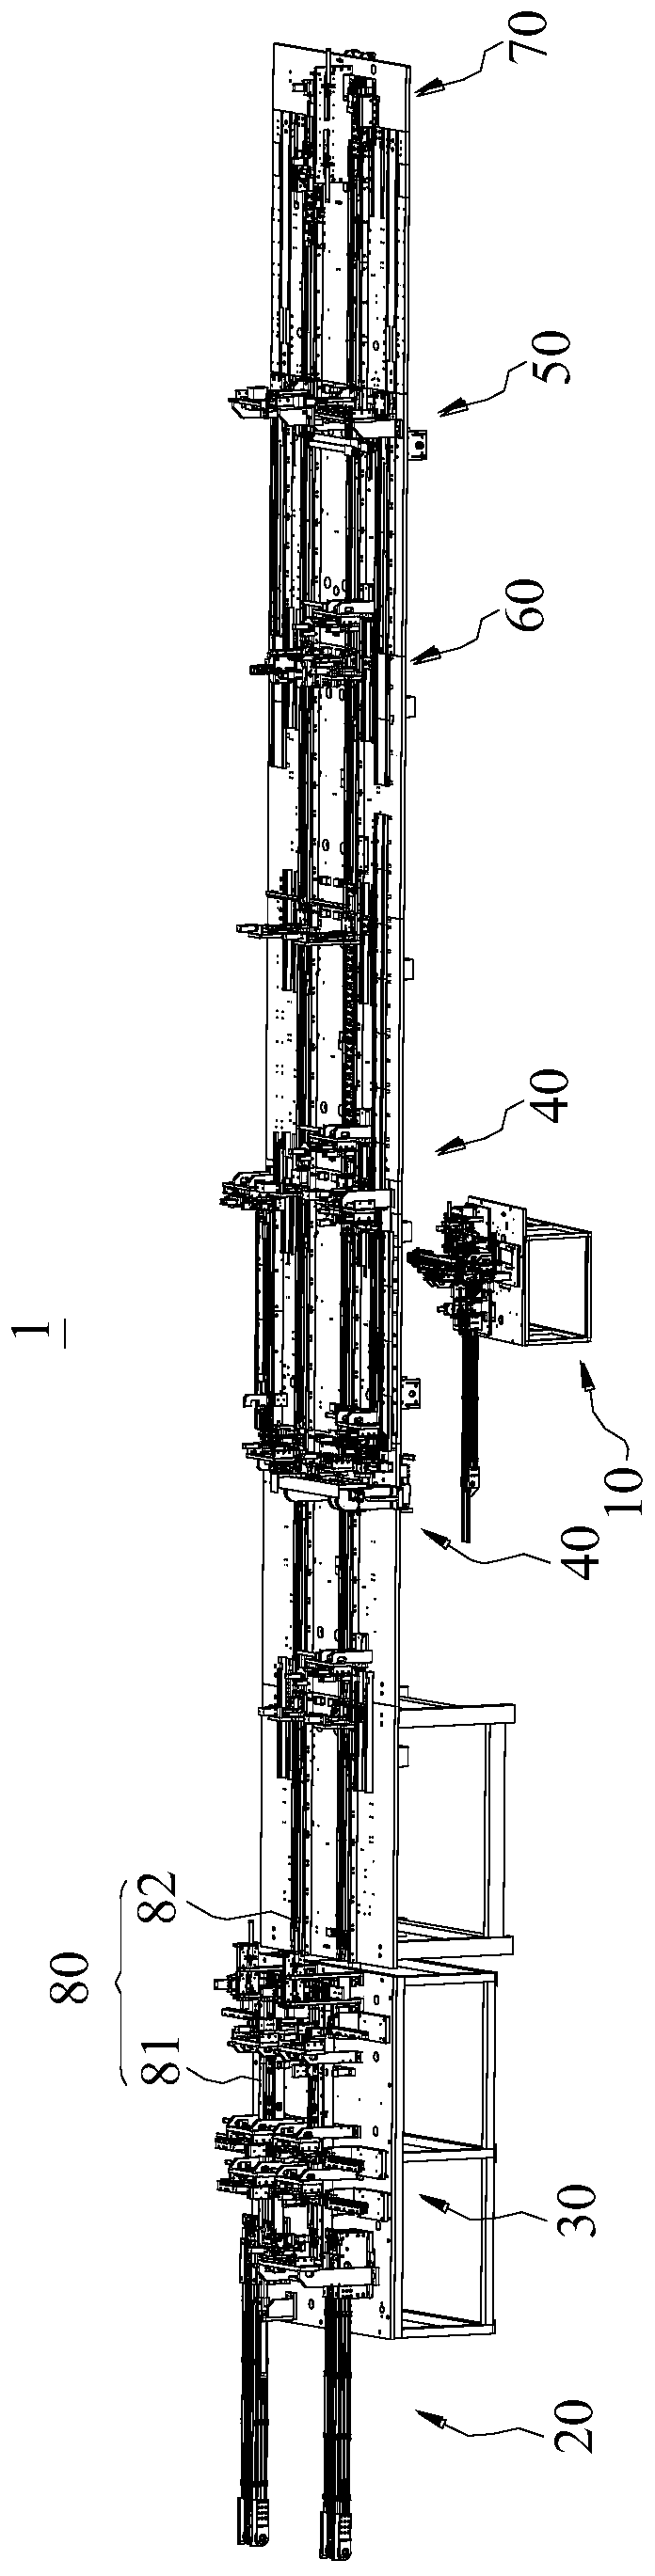 Socket surface shell assembling system and socket production line